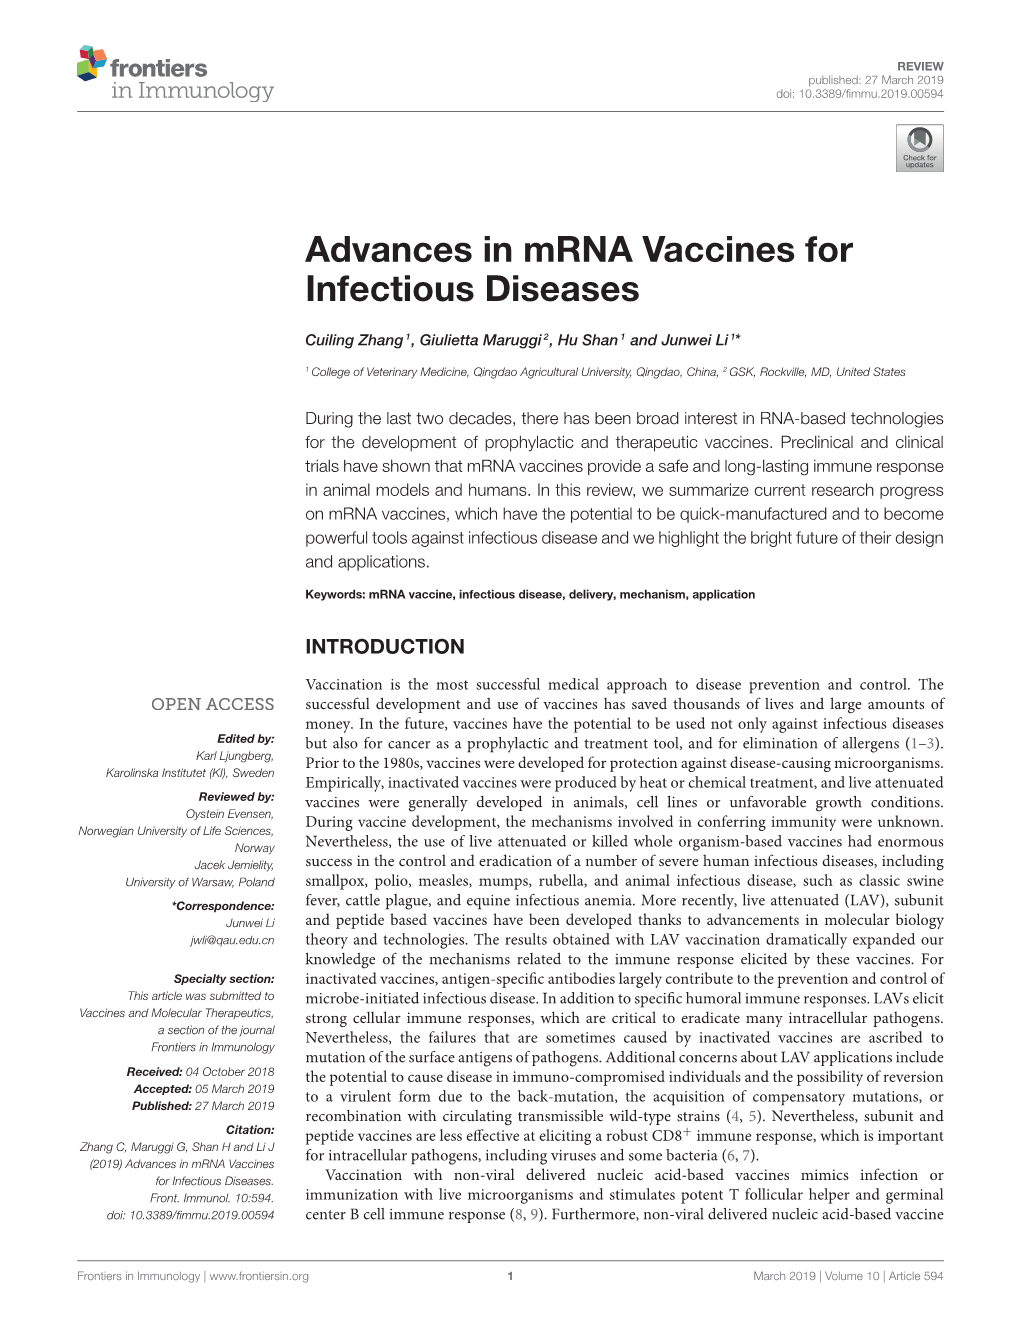 Advances in Mrna Vaccines for Infectious Diseases